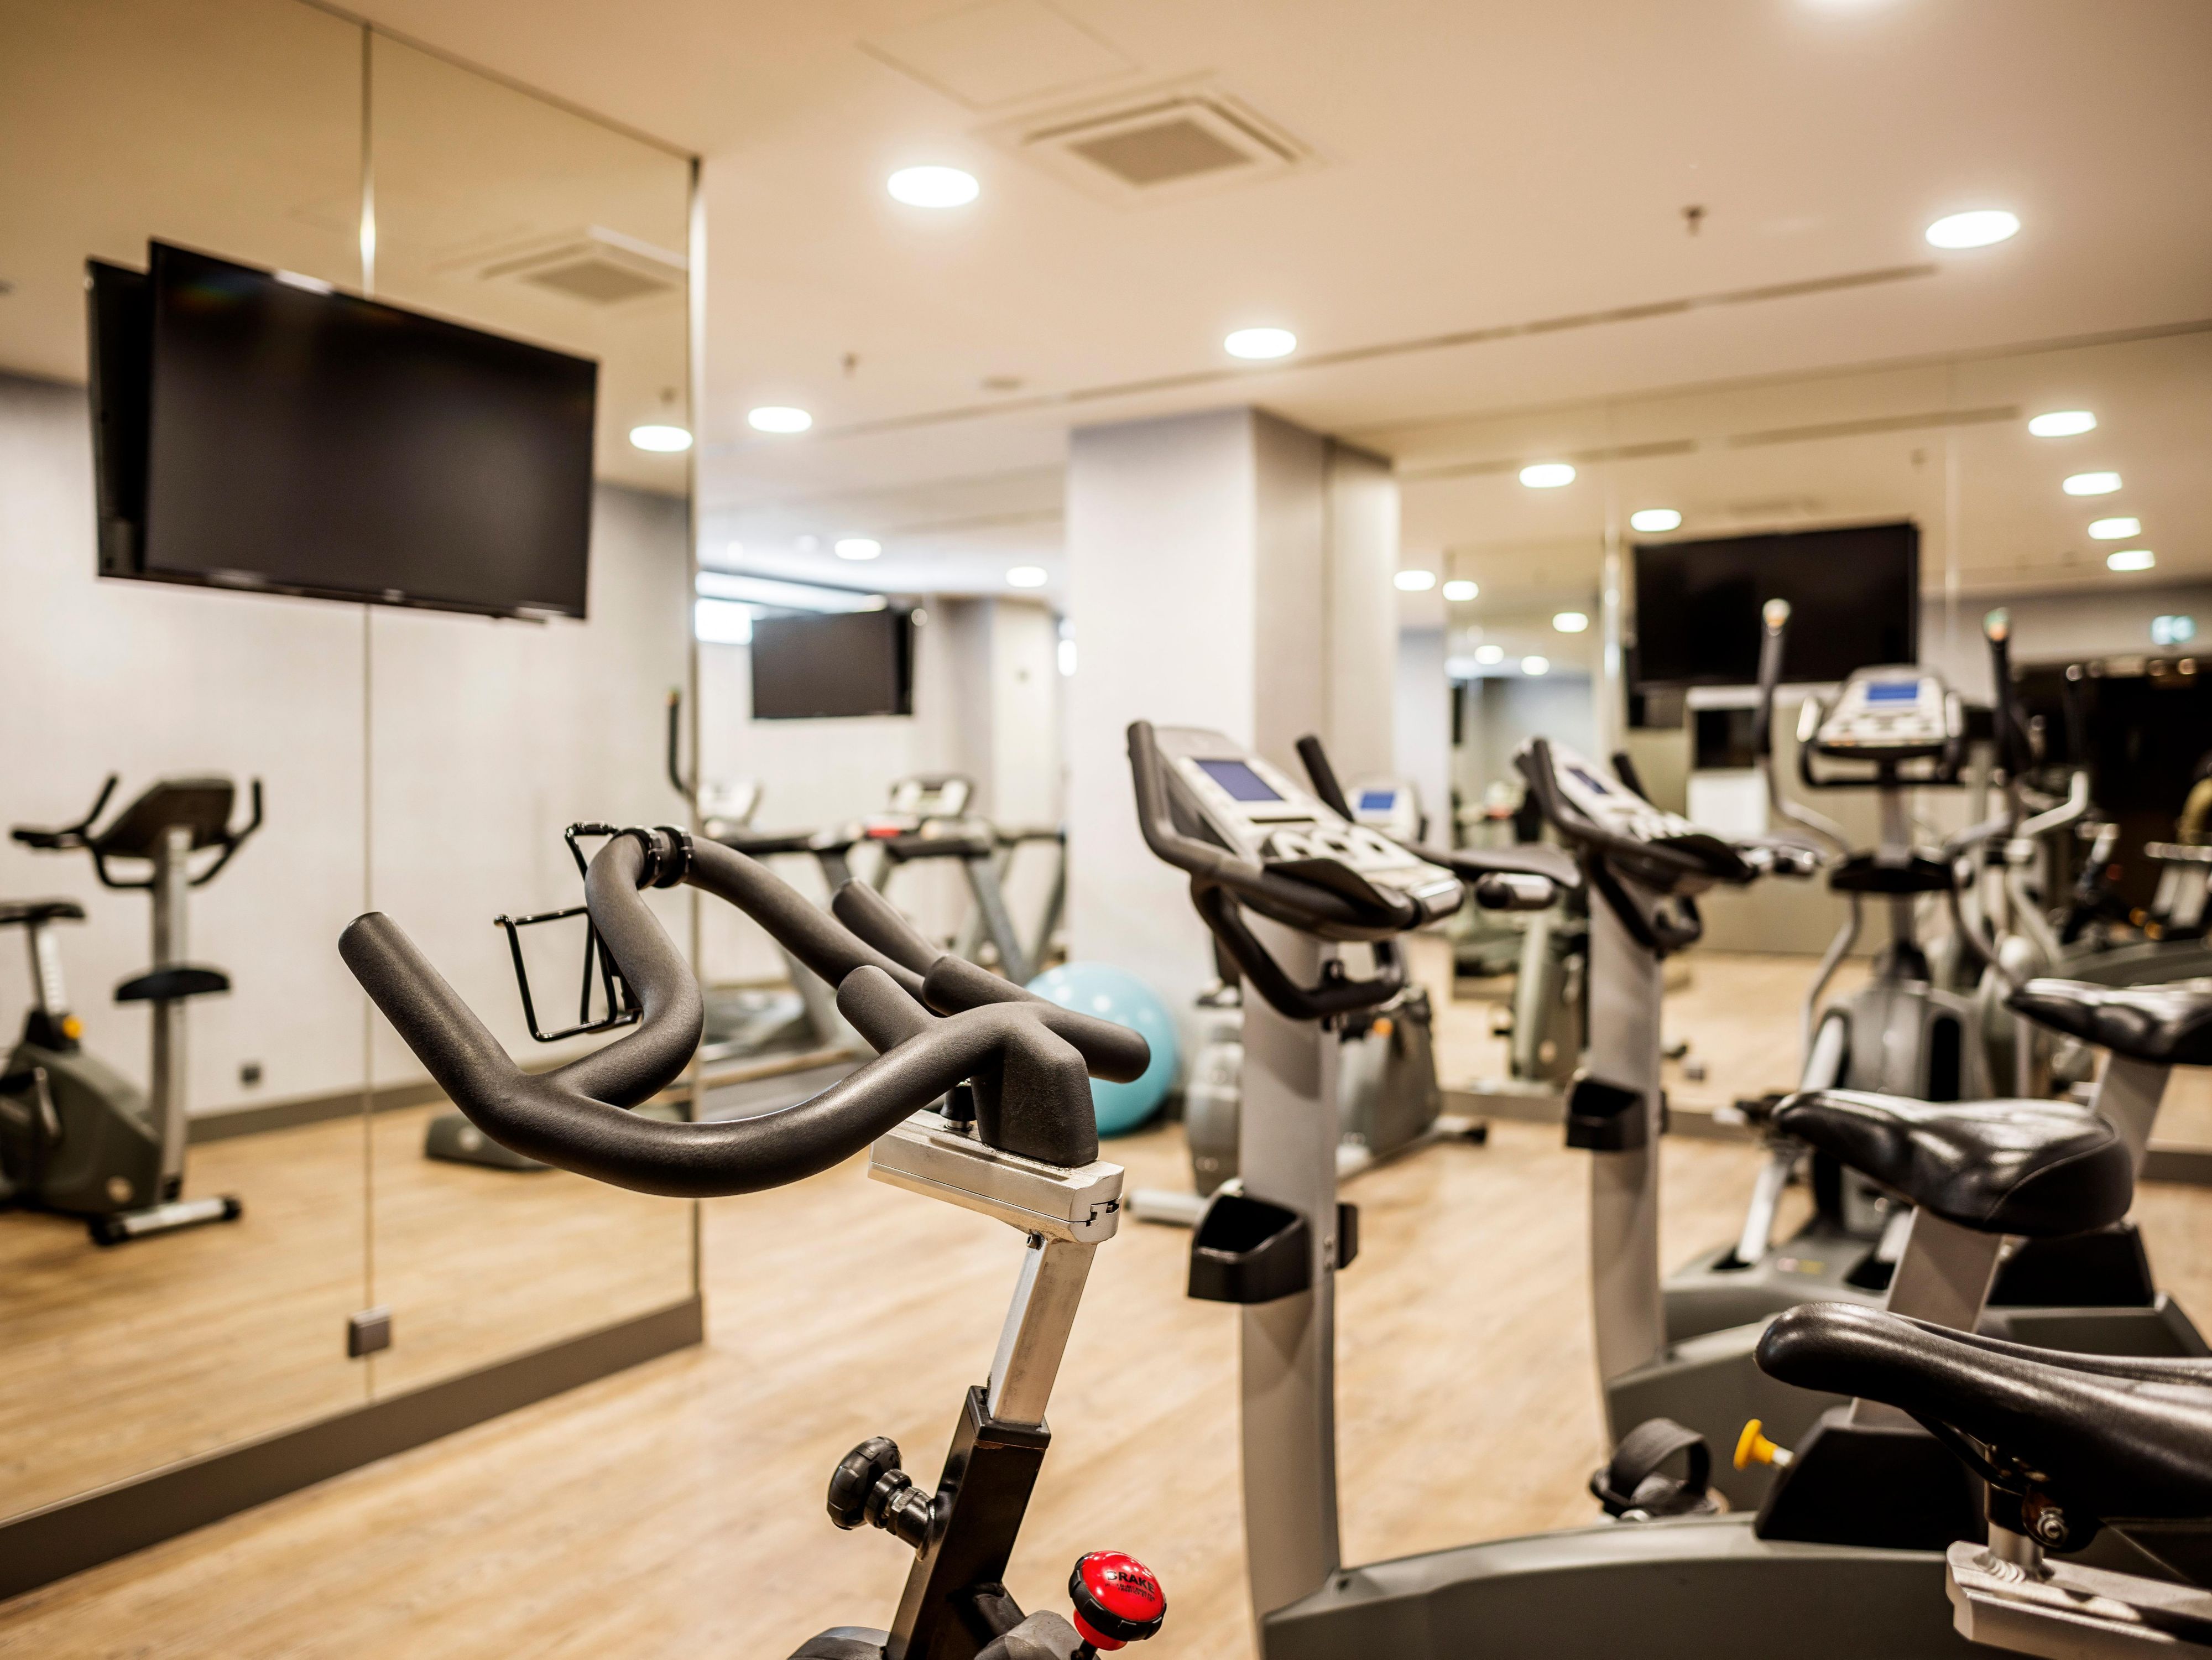 All studies point to the need of having some time to practice exercise. Our team ensures that Crowne Plaza Porto's fitness room is always in the ideal conditions so that you can make the most of this time, just thinking about you!